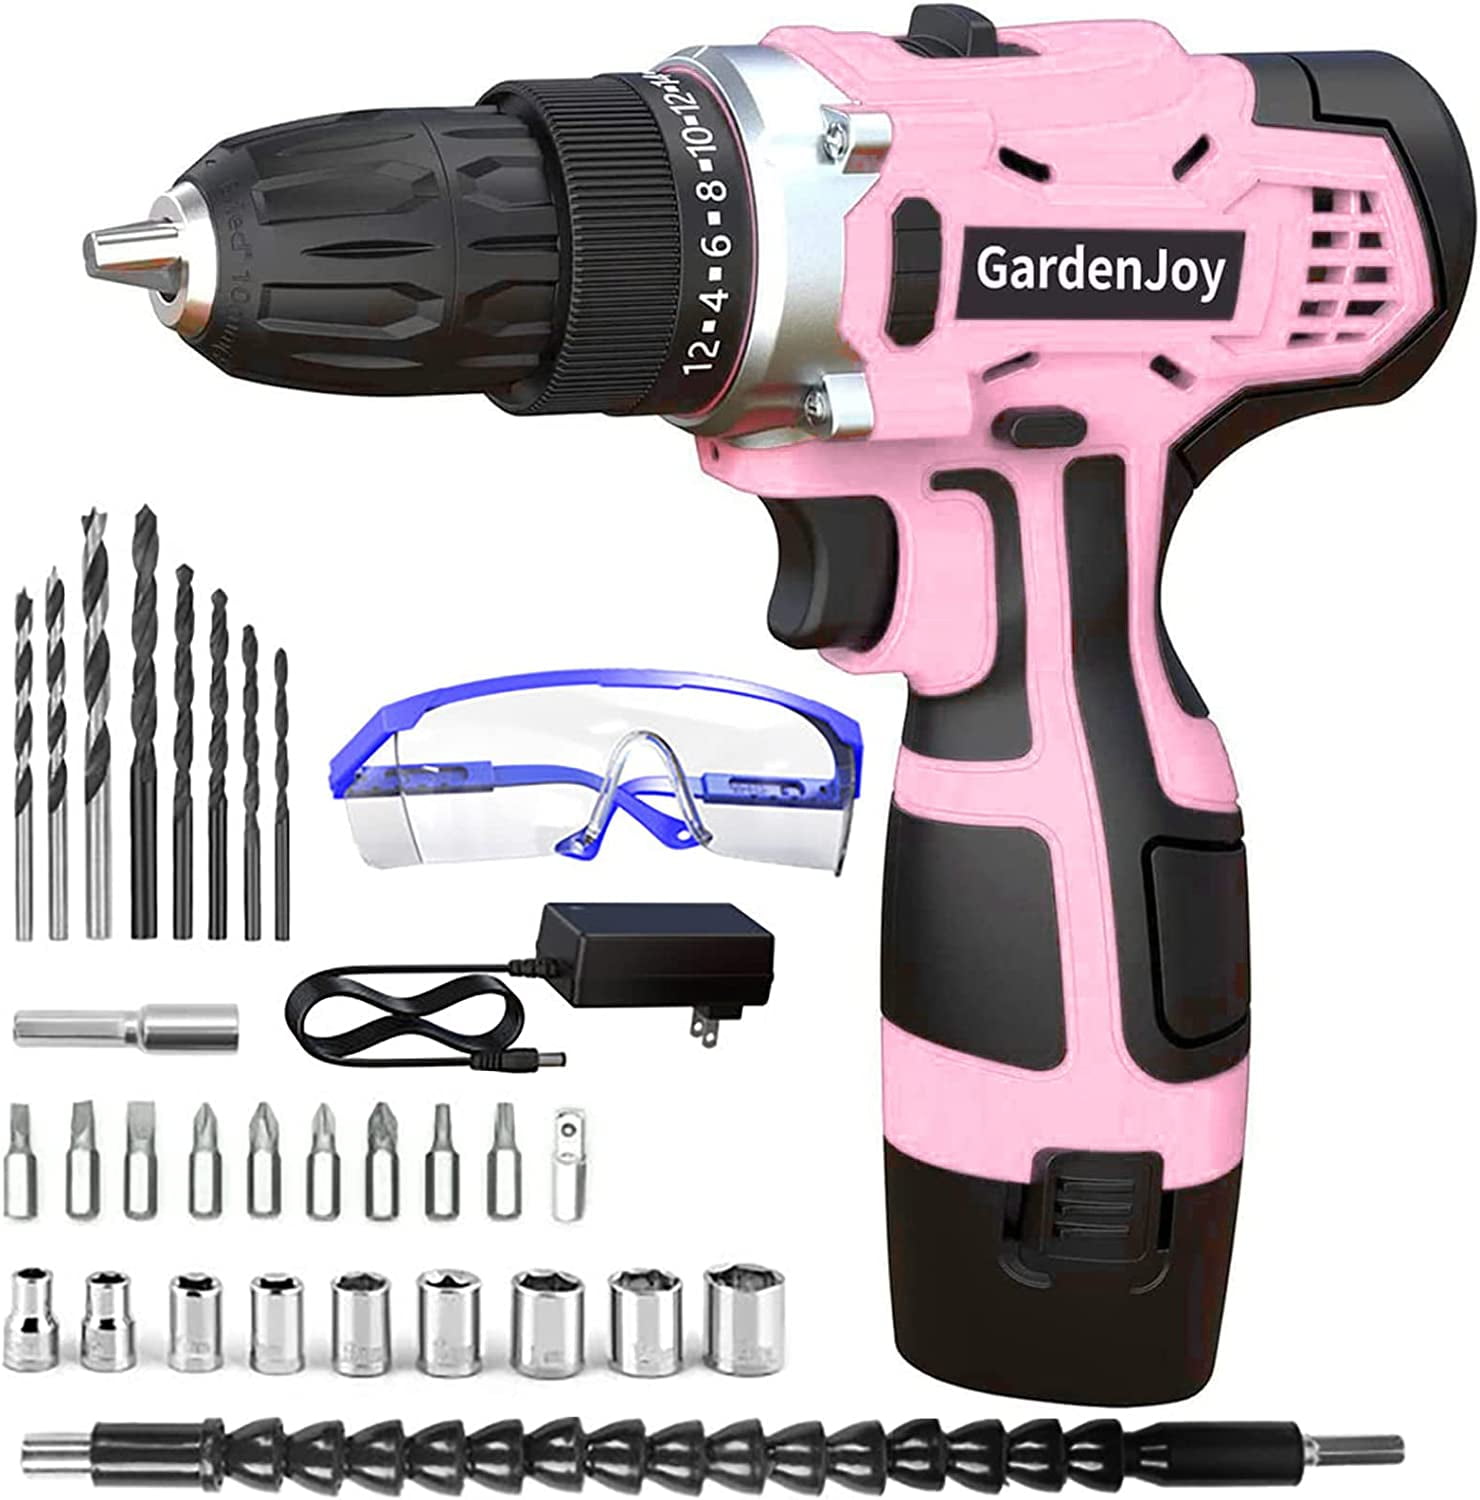 GardenJoy Cordless Power Drill Set: 12V Electric Drill with Fast Charg